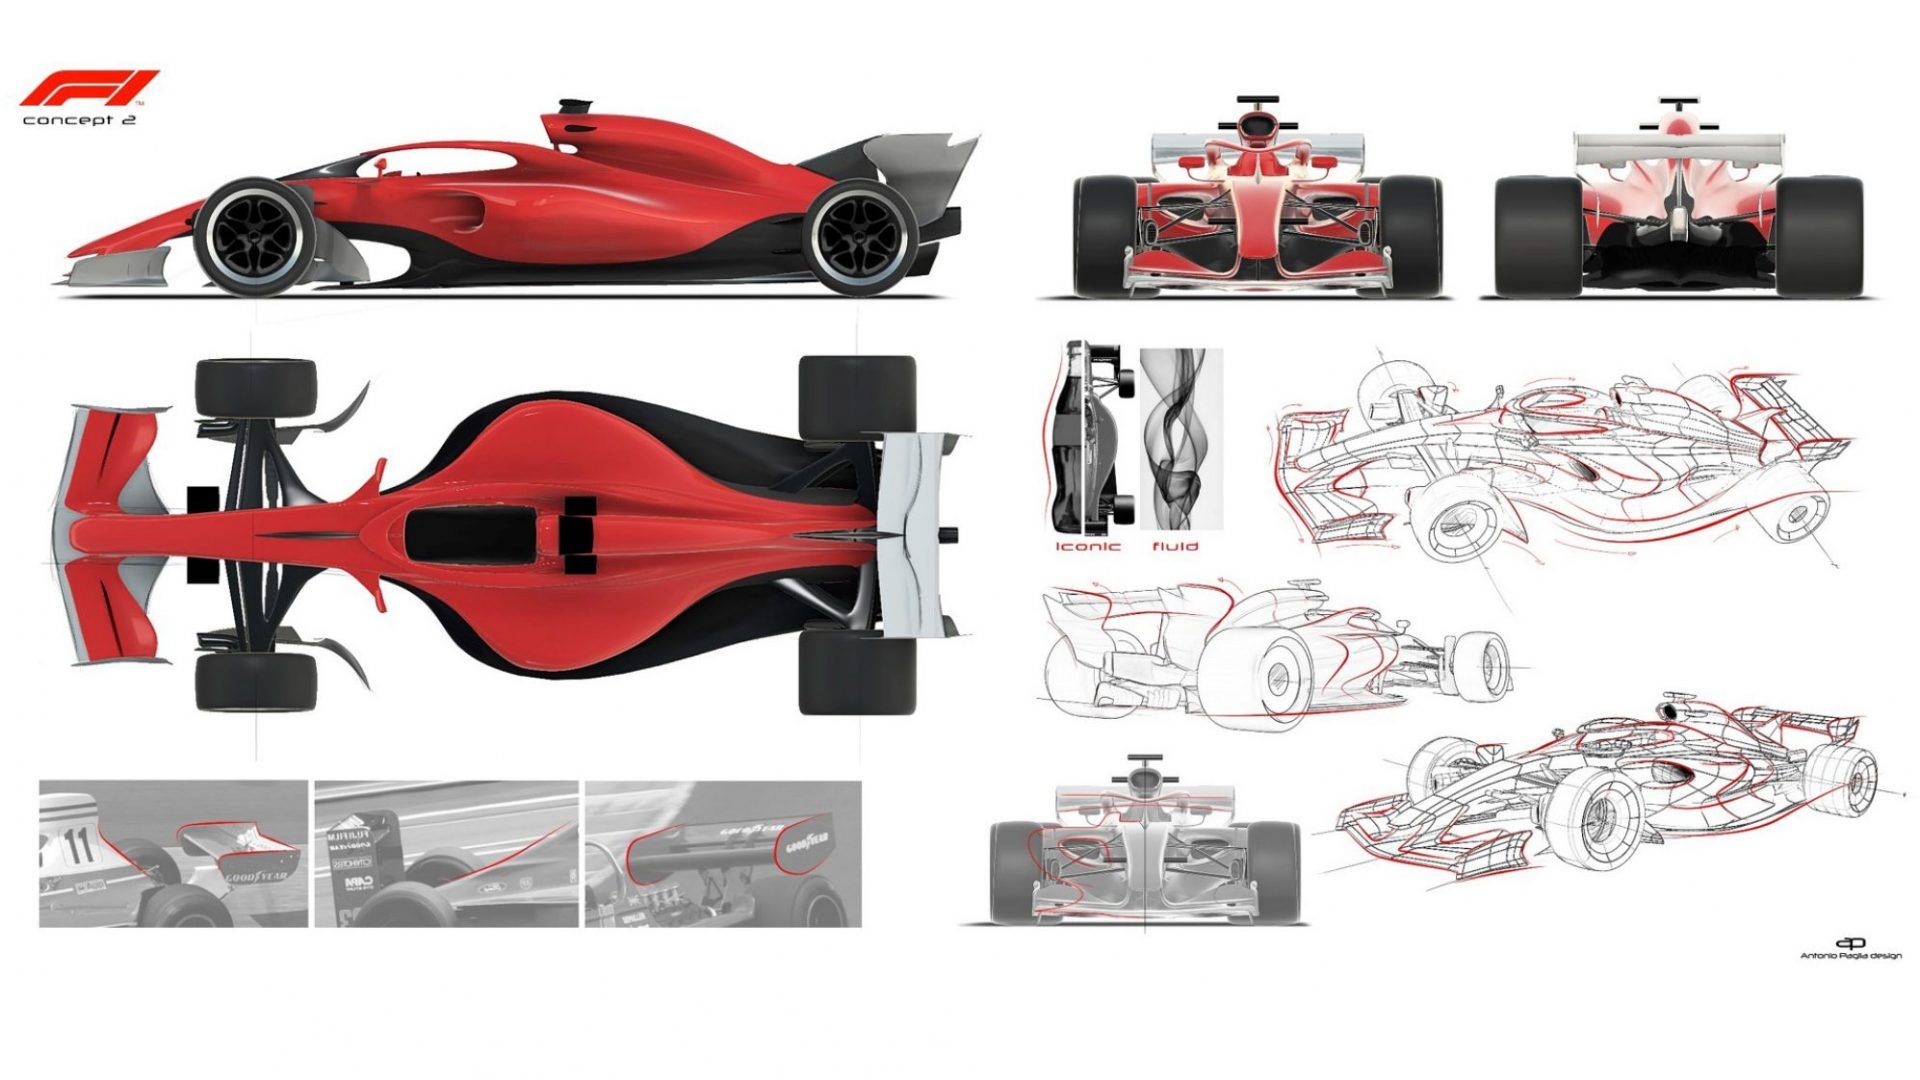 F1 2021 official concept image